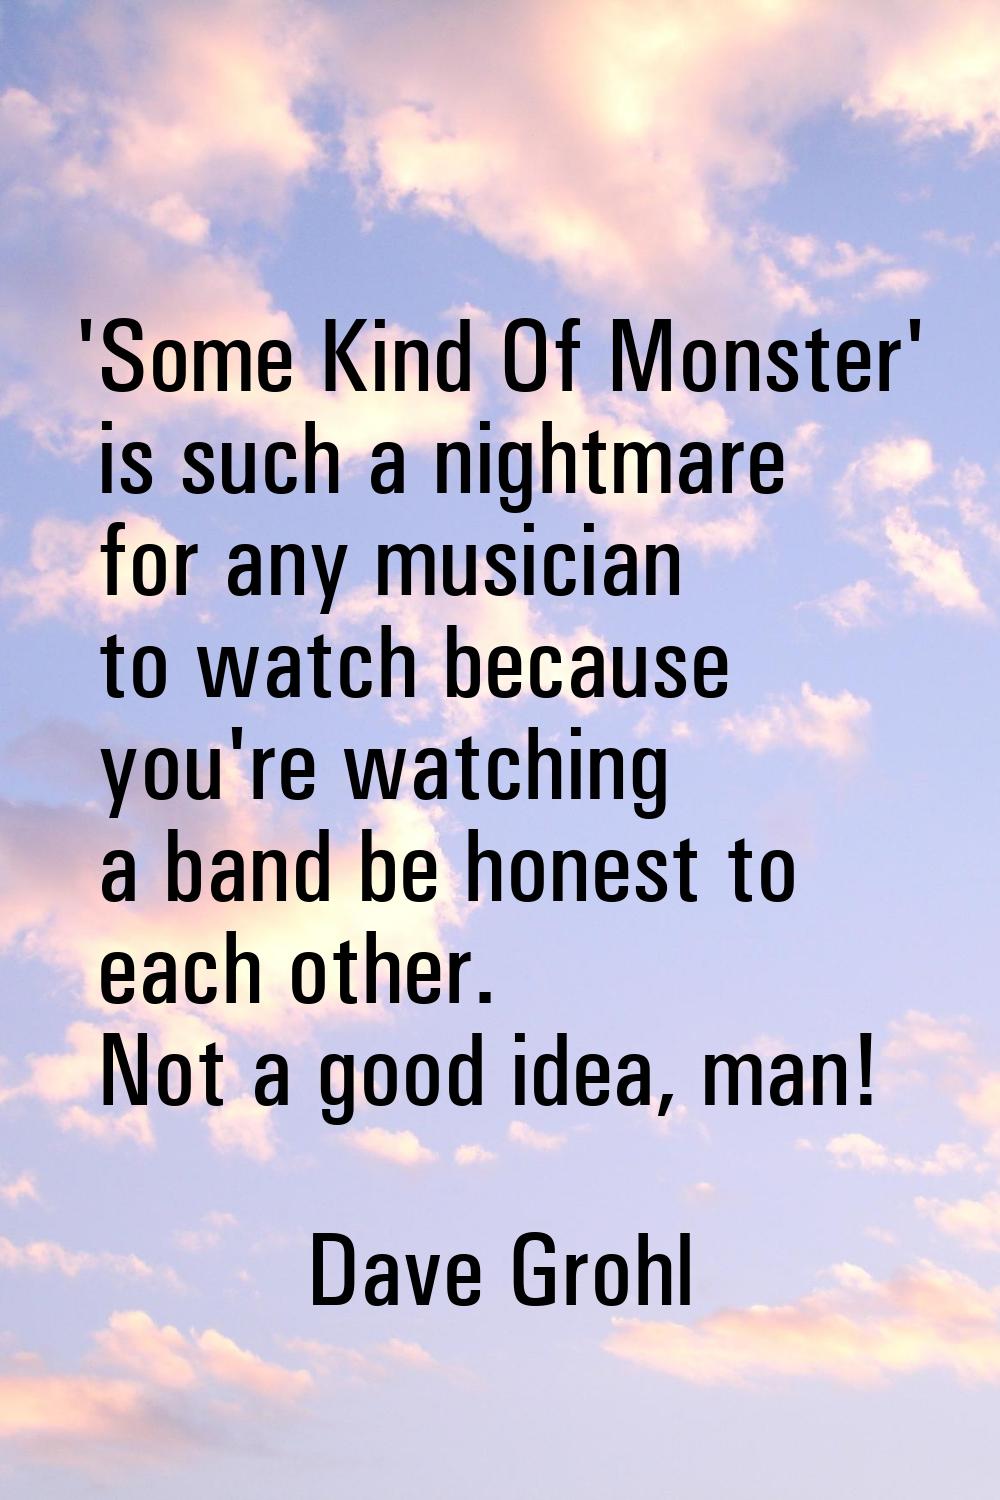 'Some Kind Of Monster' is such a nightmare for any musician to watch because you're watching a band